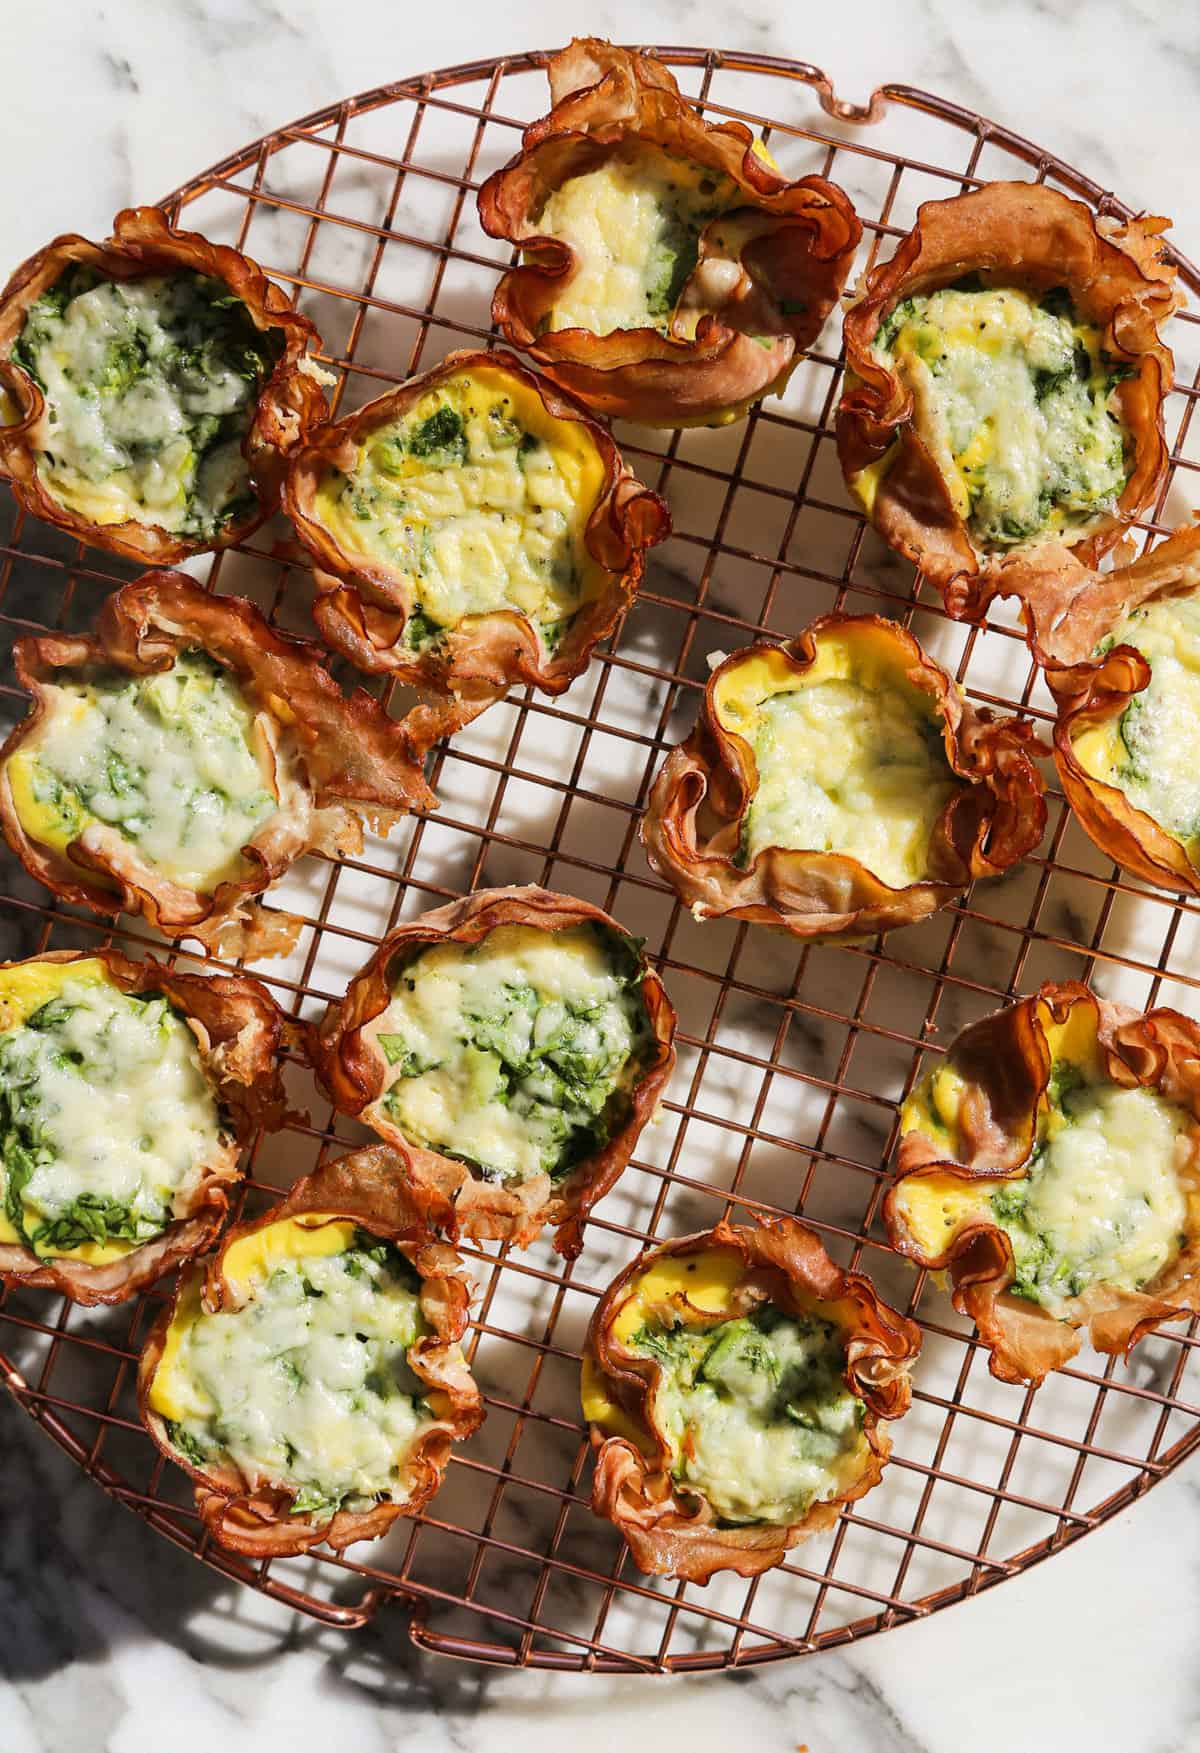 Keto Egg Bites With Spinach & Cheese - Keto Cooking Wins